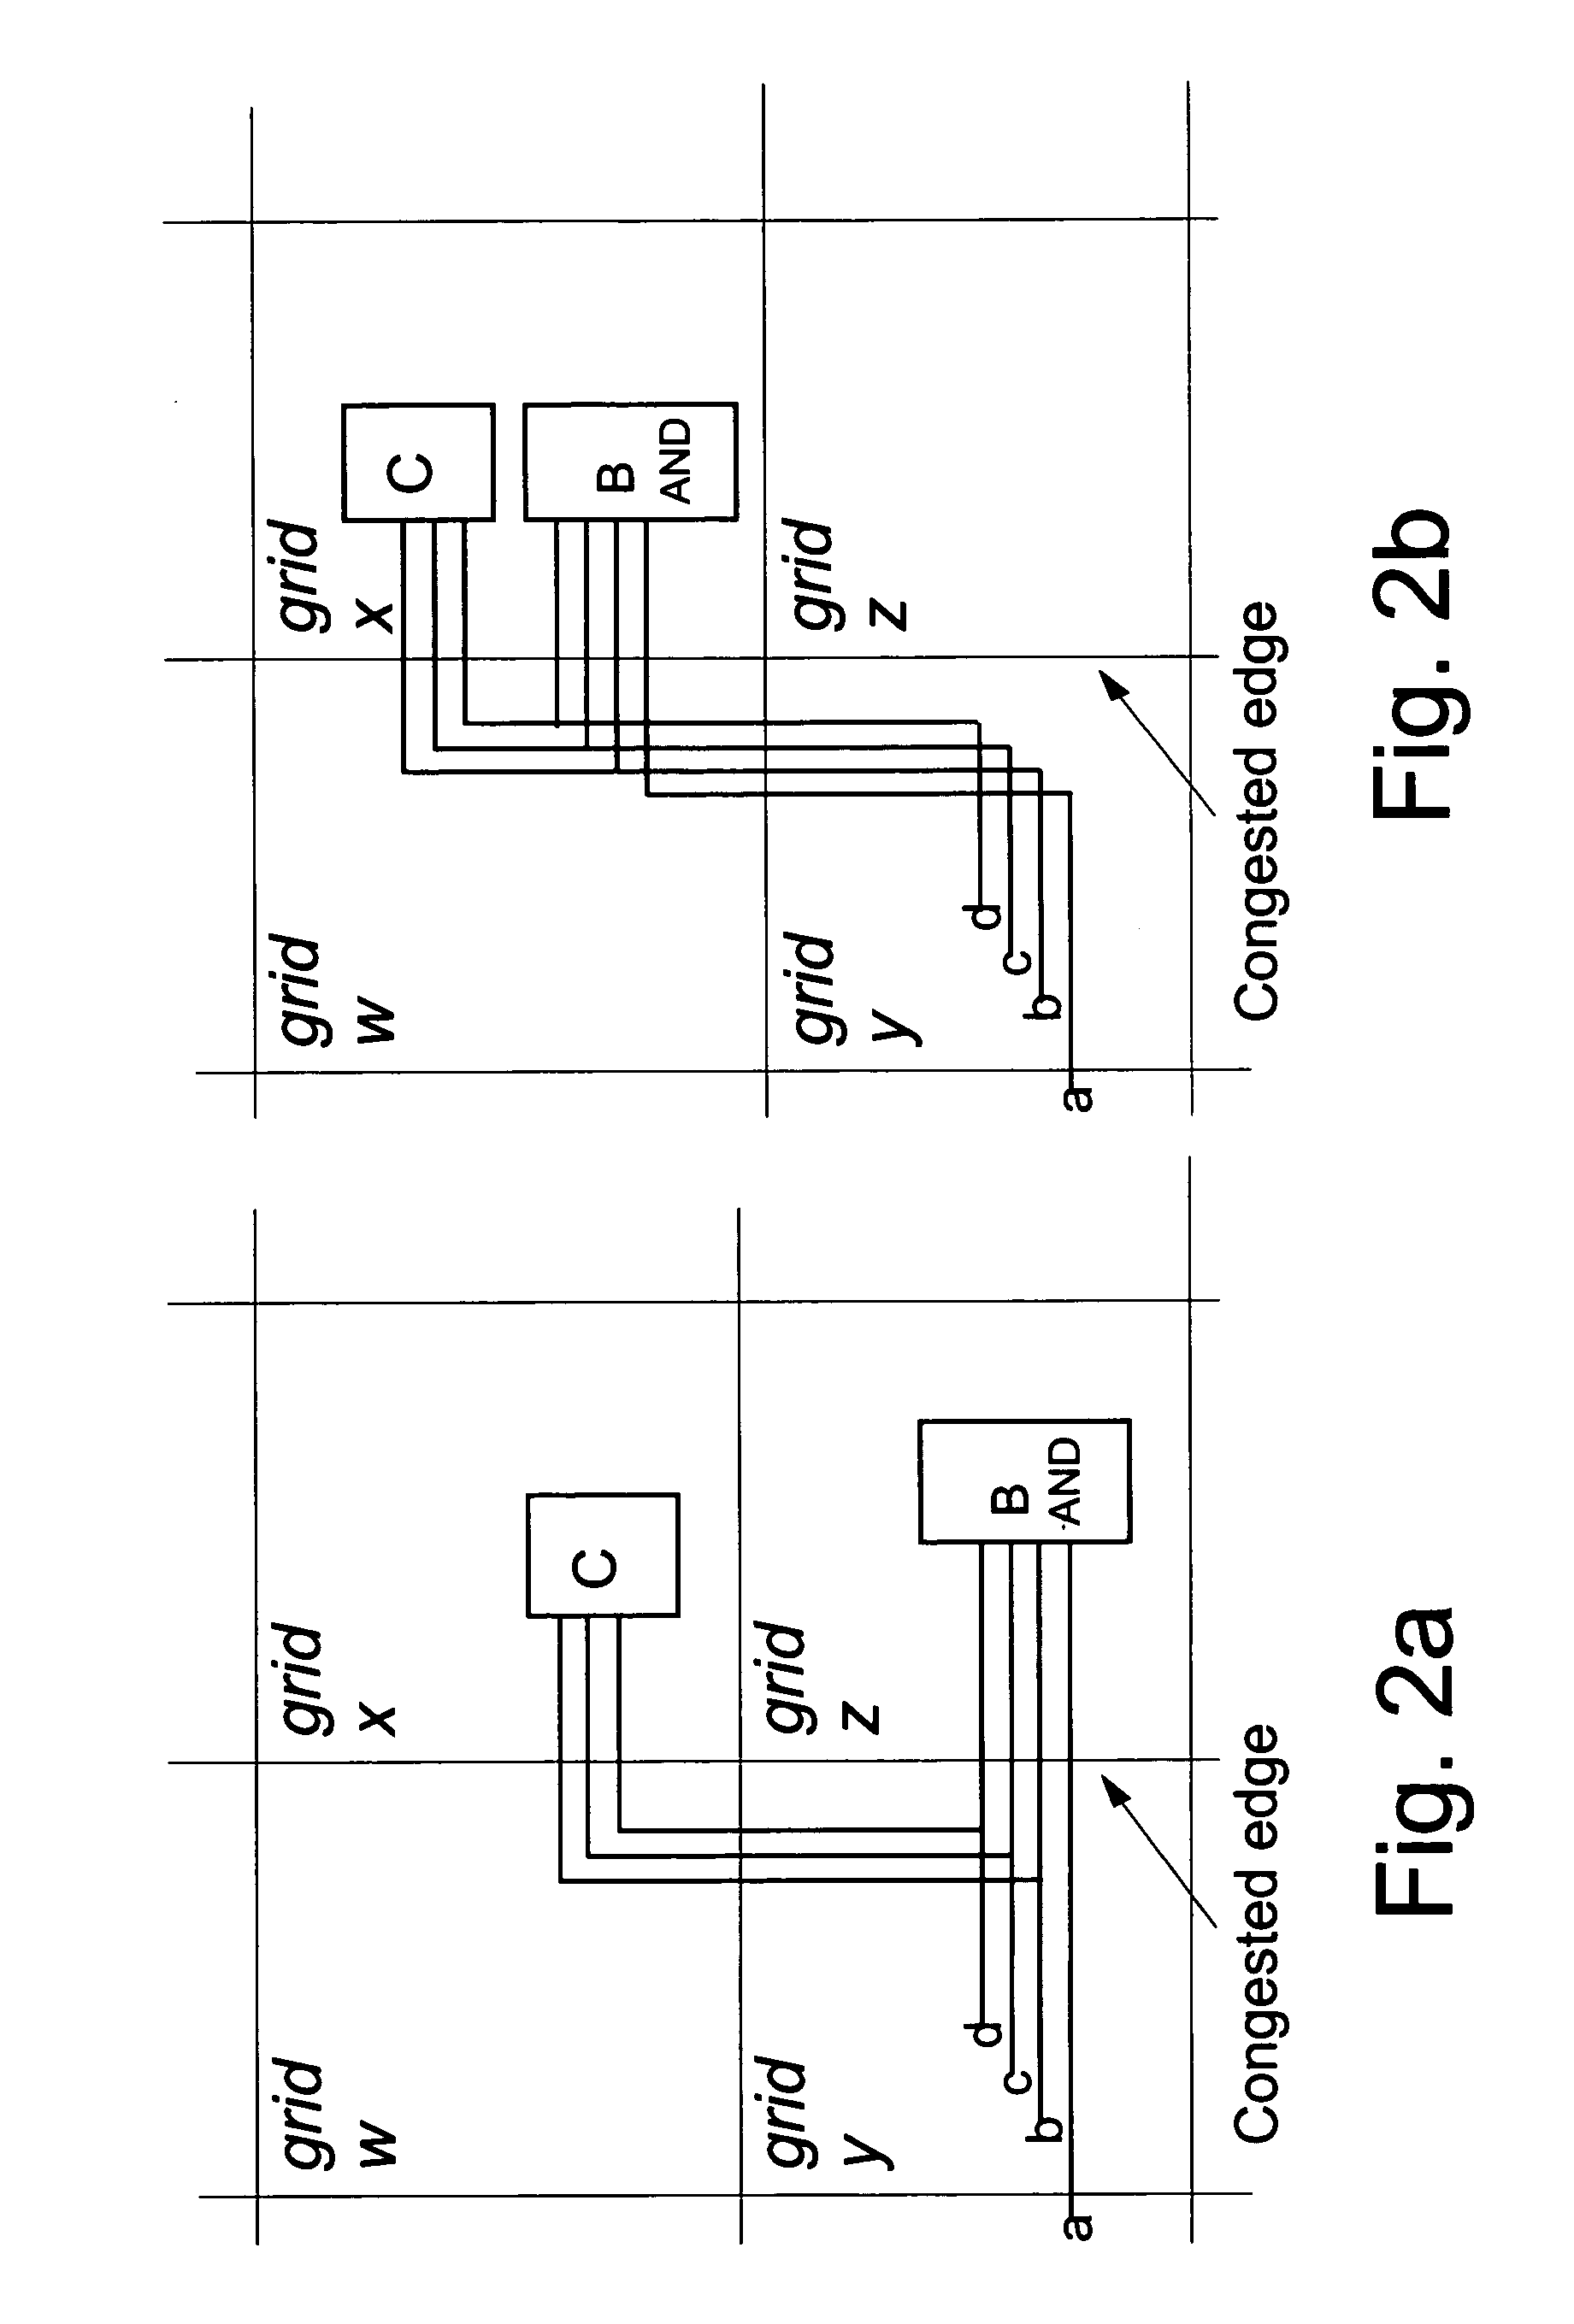 Method for reducing wiring congestion in a VLSI chip design